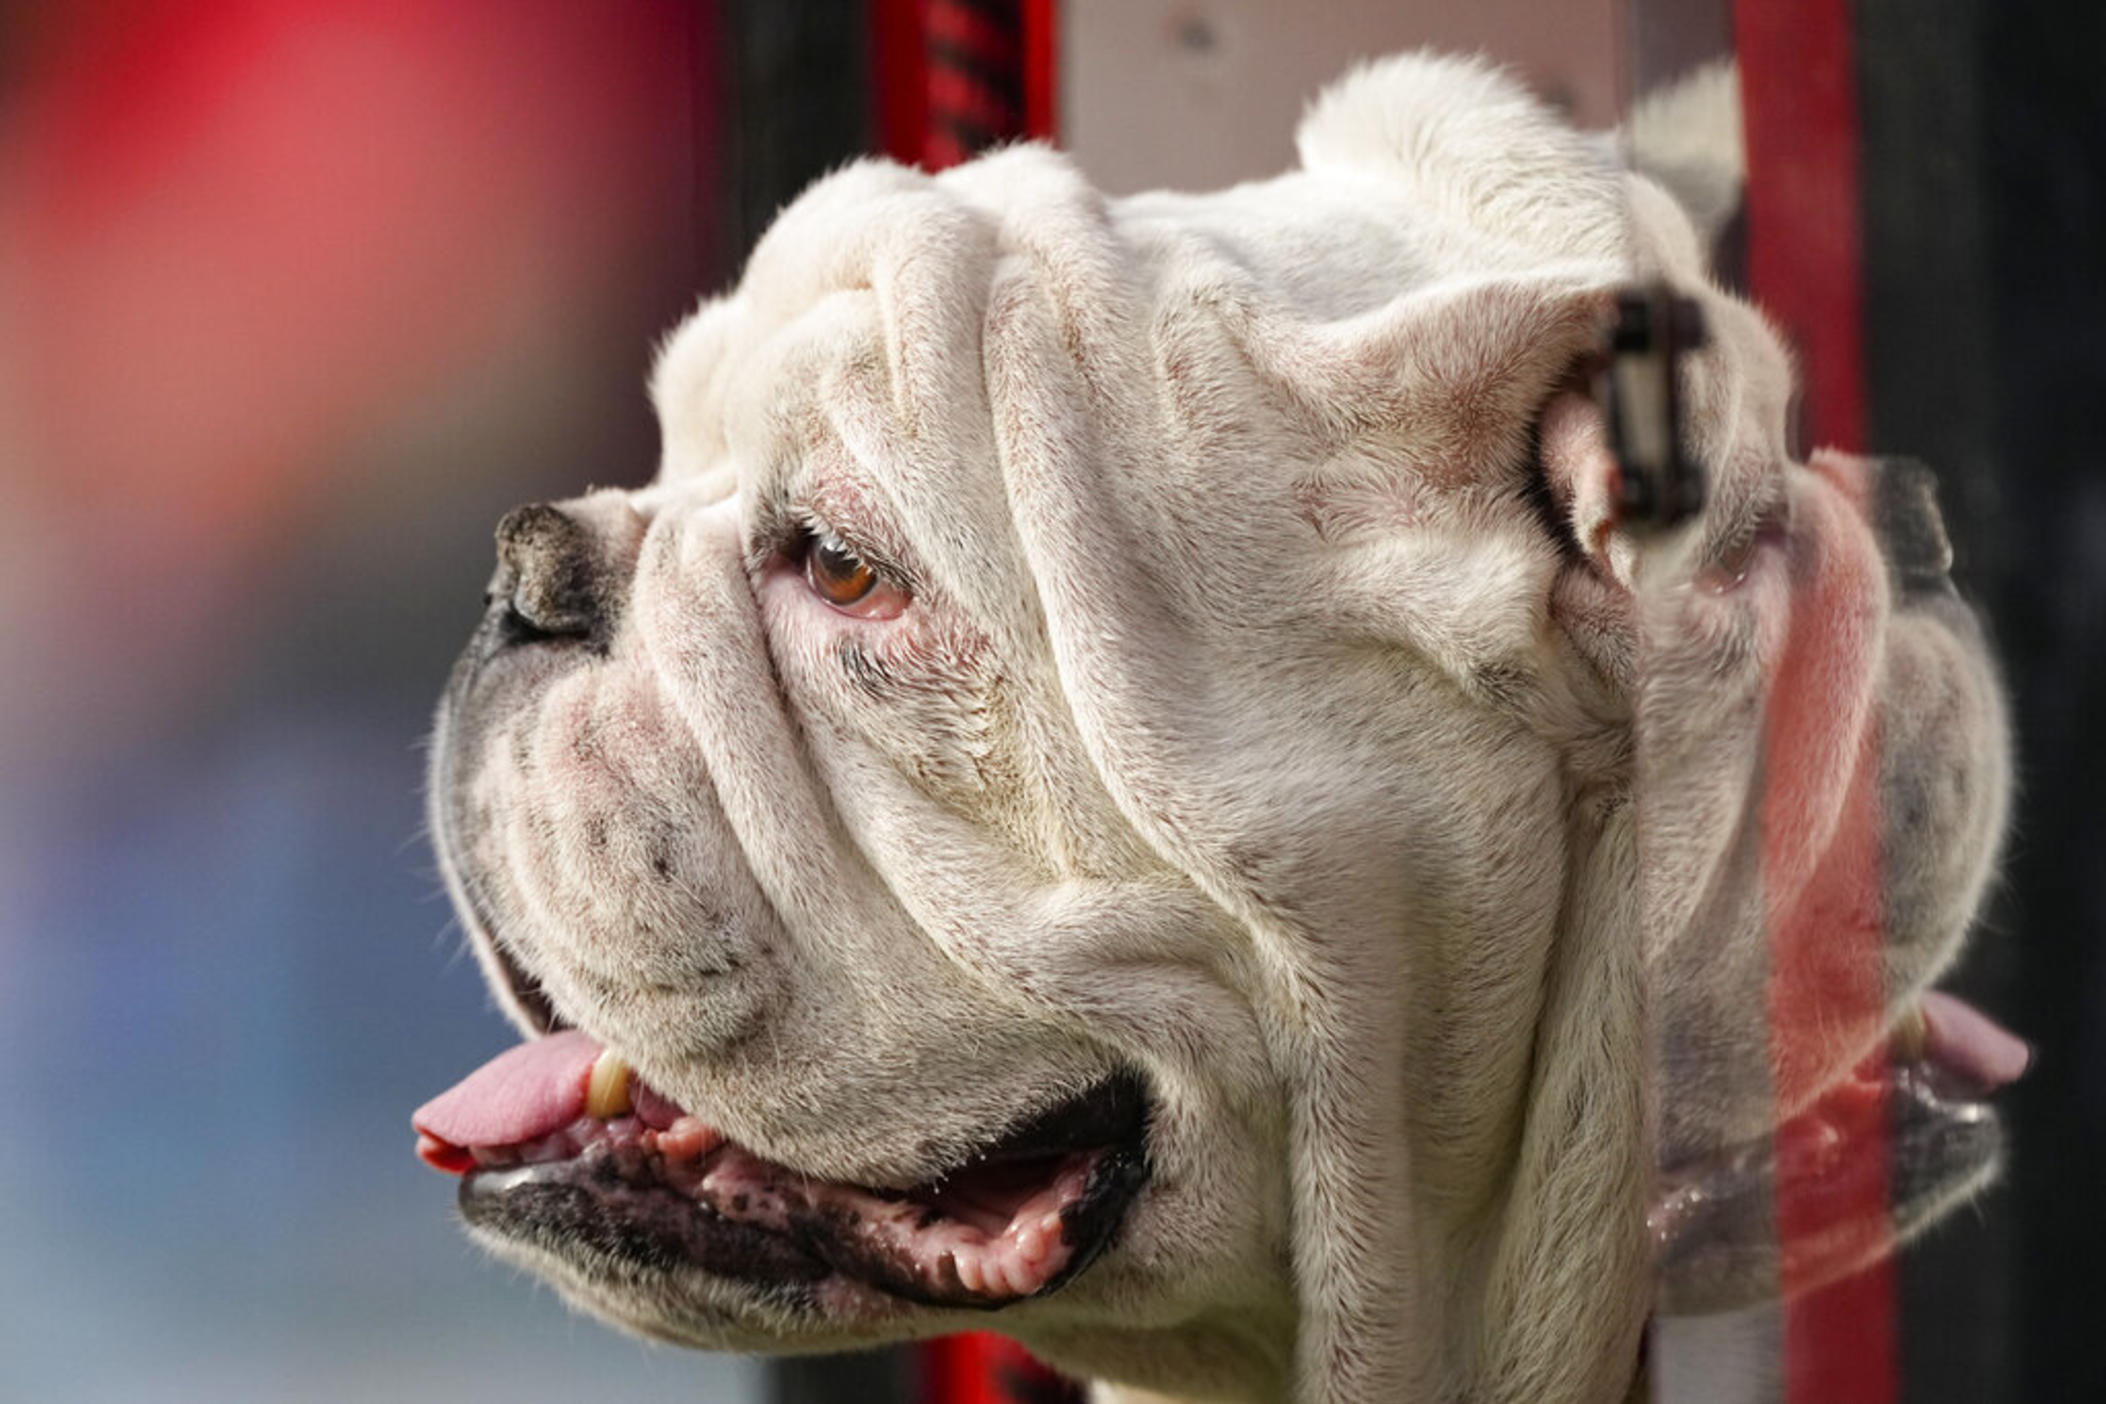 Georgia mascot Uga X peers out from his doghouse on the sideline during during the second half of an NCAA college football game against Georgia Tech Saturday, Nov. 26, 2022 in Athens, Ga. 